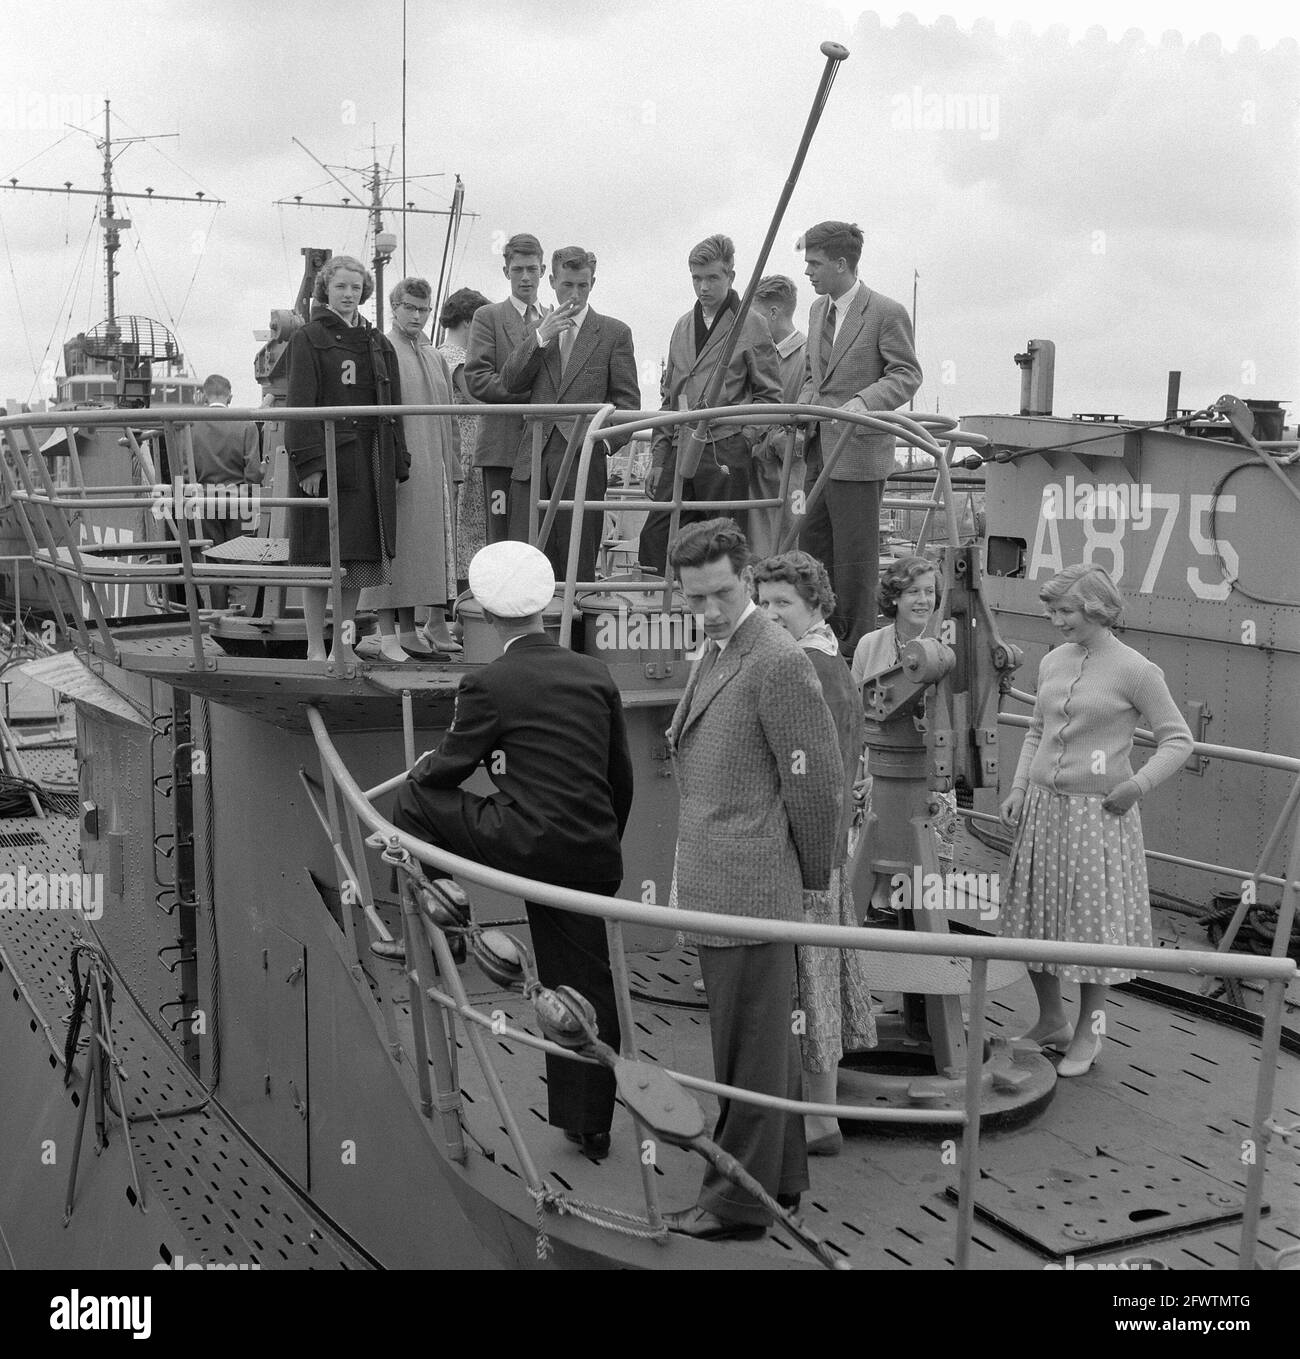 Submarine Service 50 years, May 29, 1957, UNDERSTANDING SERVICES, The Netherlands, 20th century press agency photo, news to remember, documentary, historic photography 1945-1990, visual stories, human history of the Twentieth Century, capturing moments in time Stock Photo